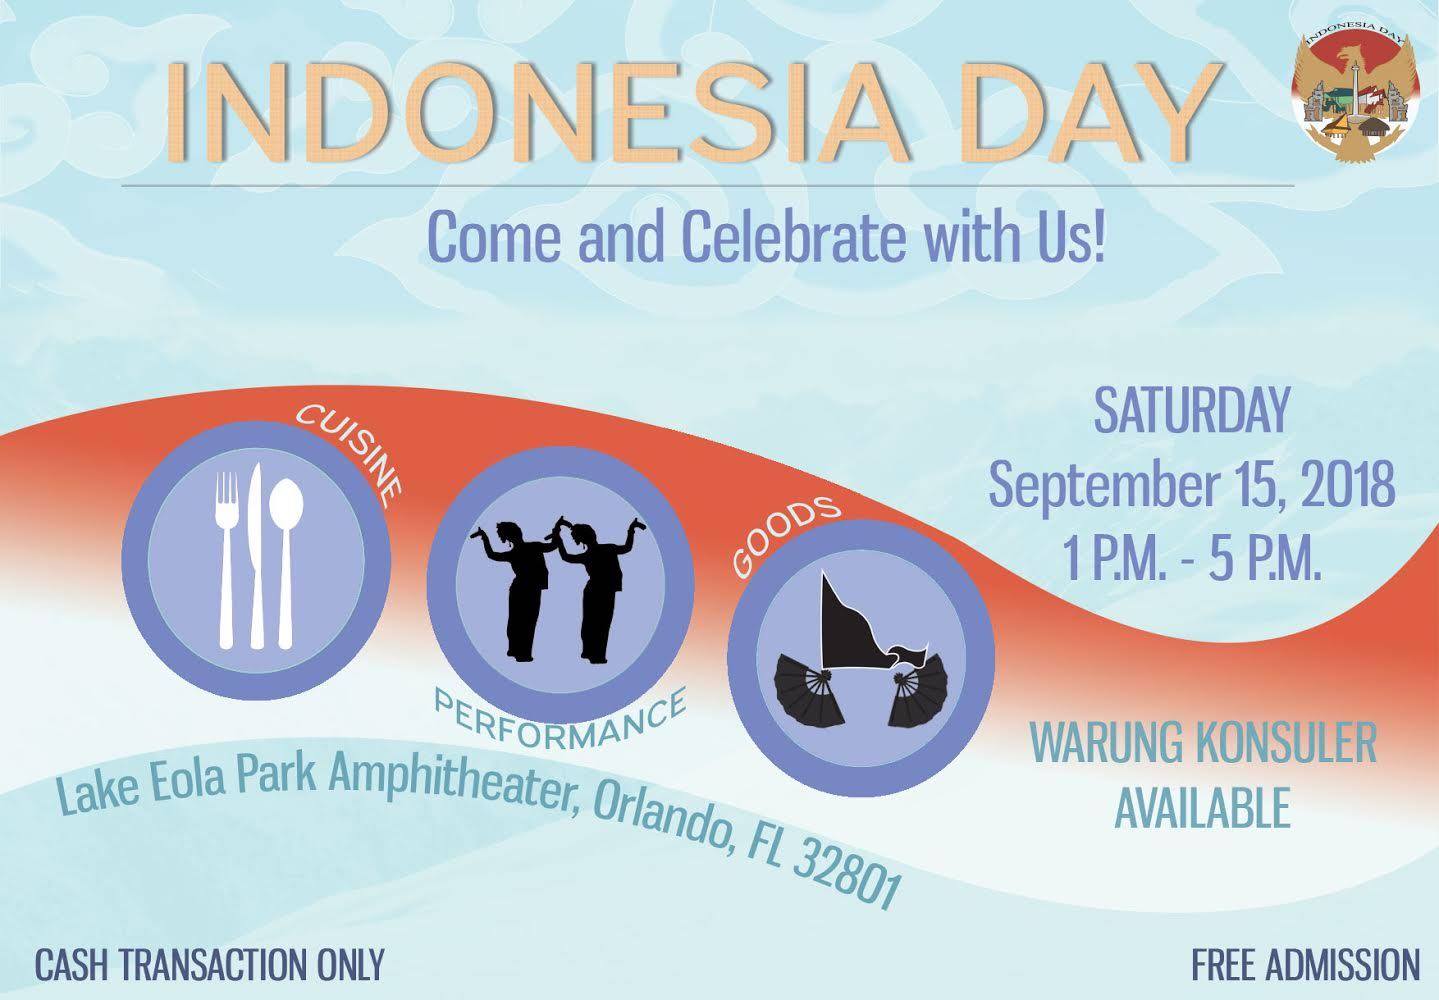 Indonesia Day